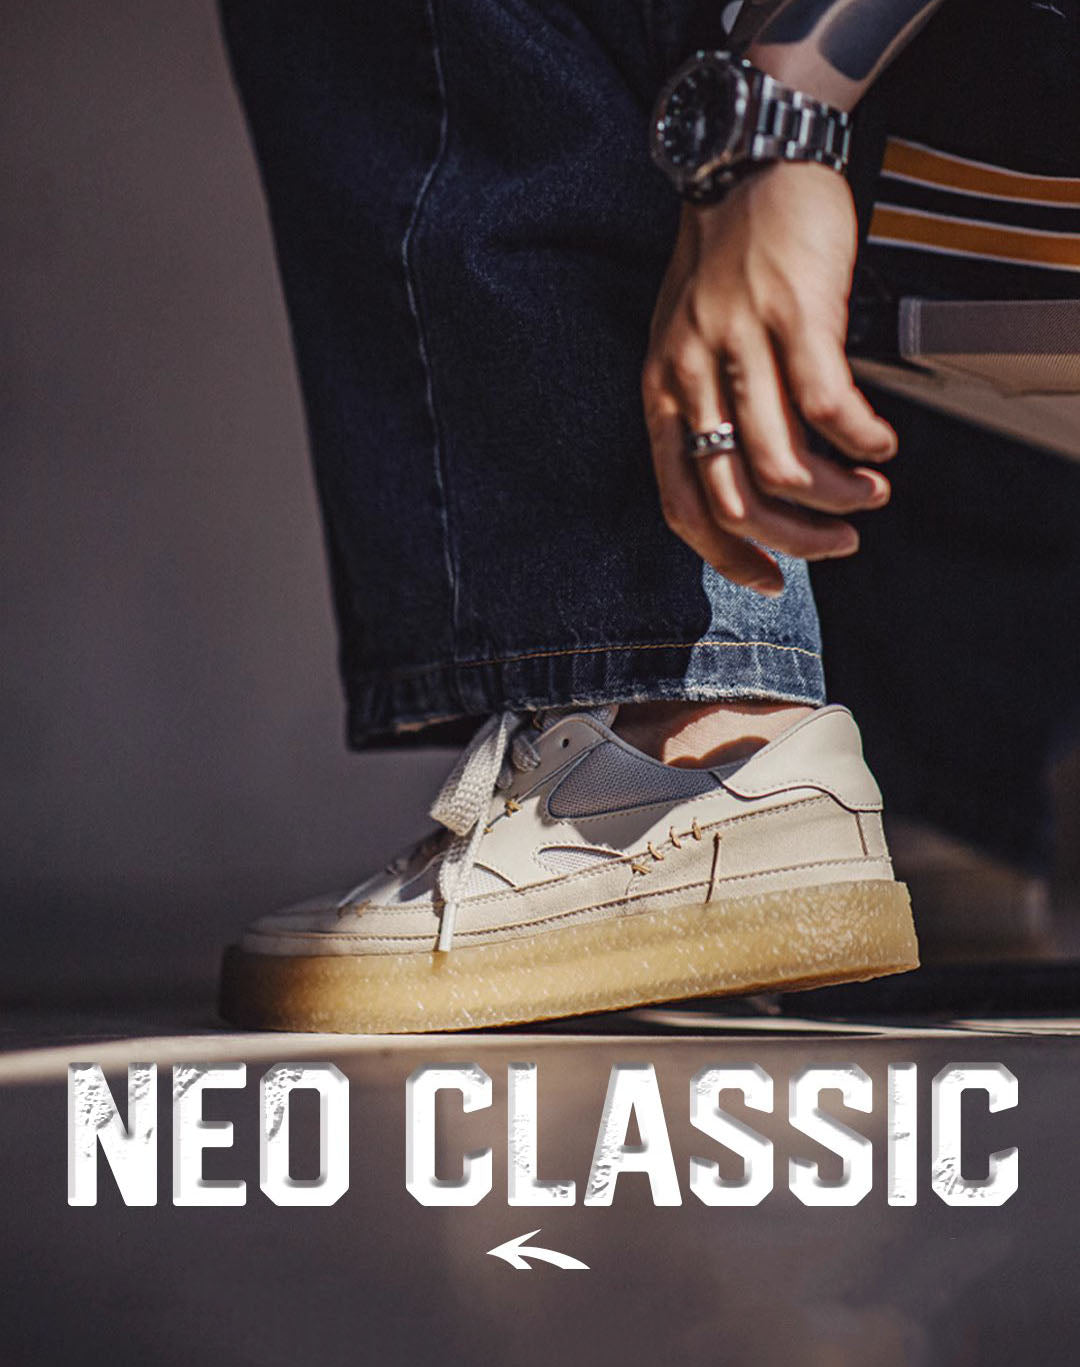 American Neo Classic Breathable And Versatile Men's Casual Shoes - Harmony Gallery